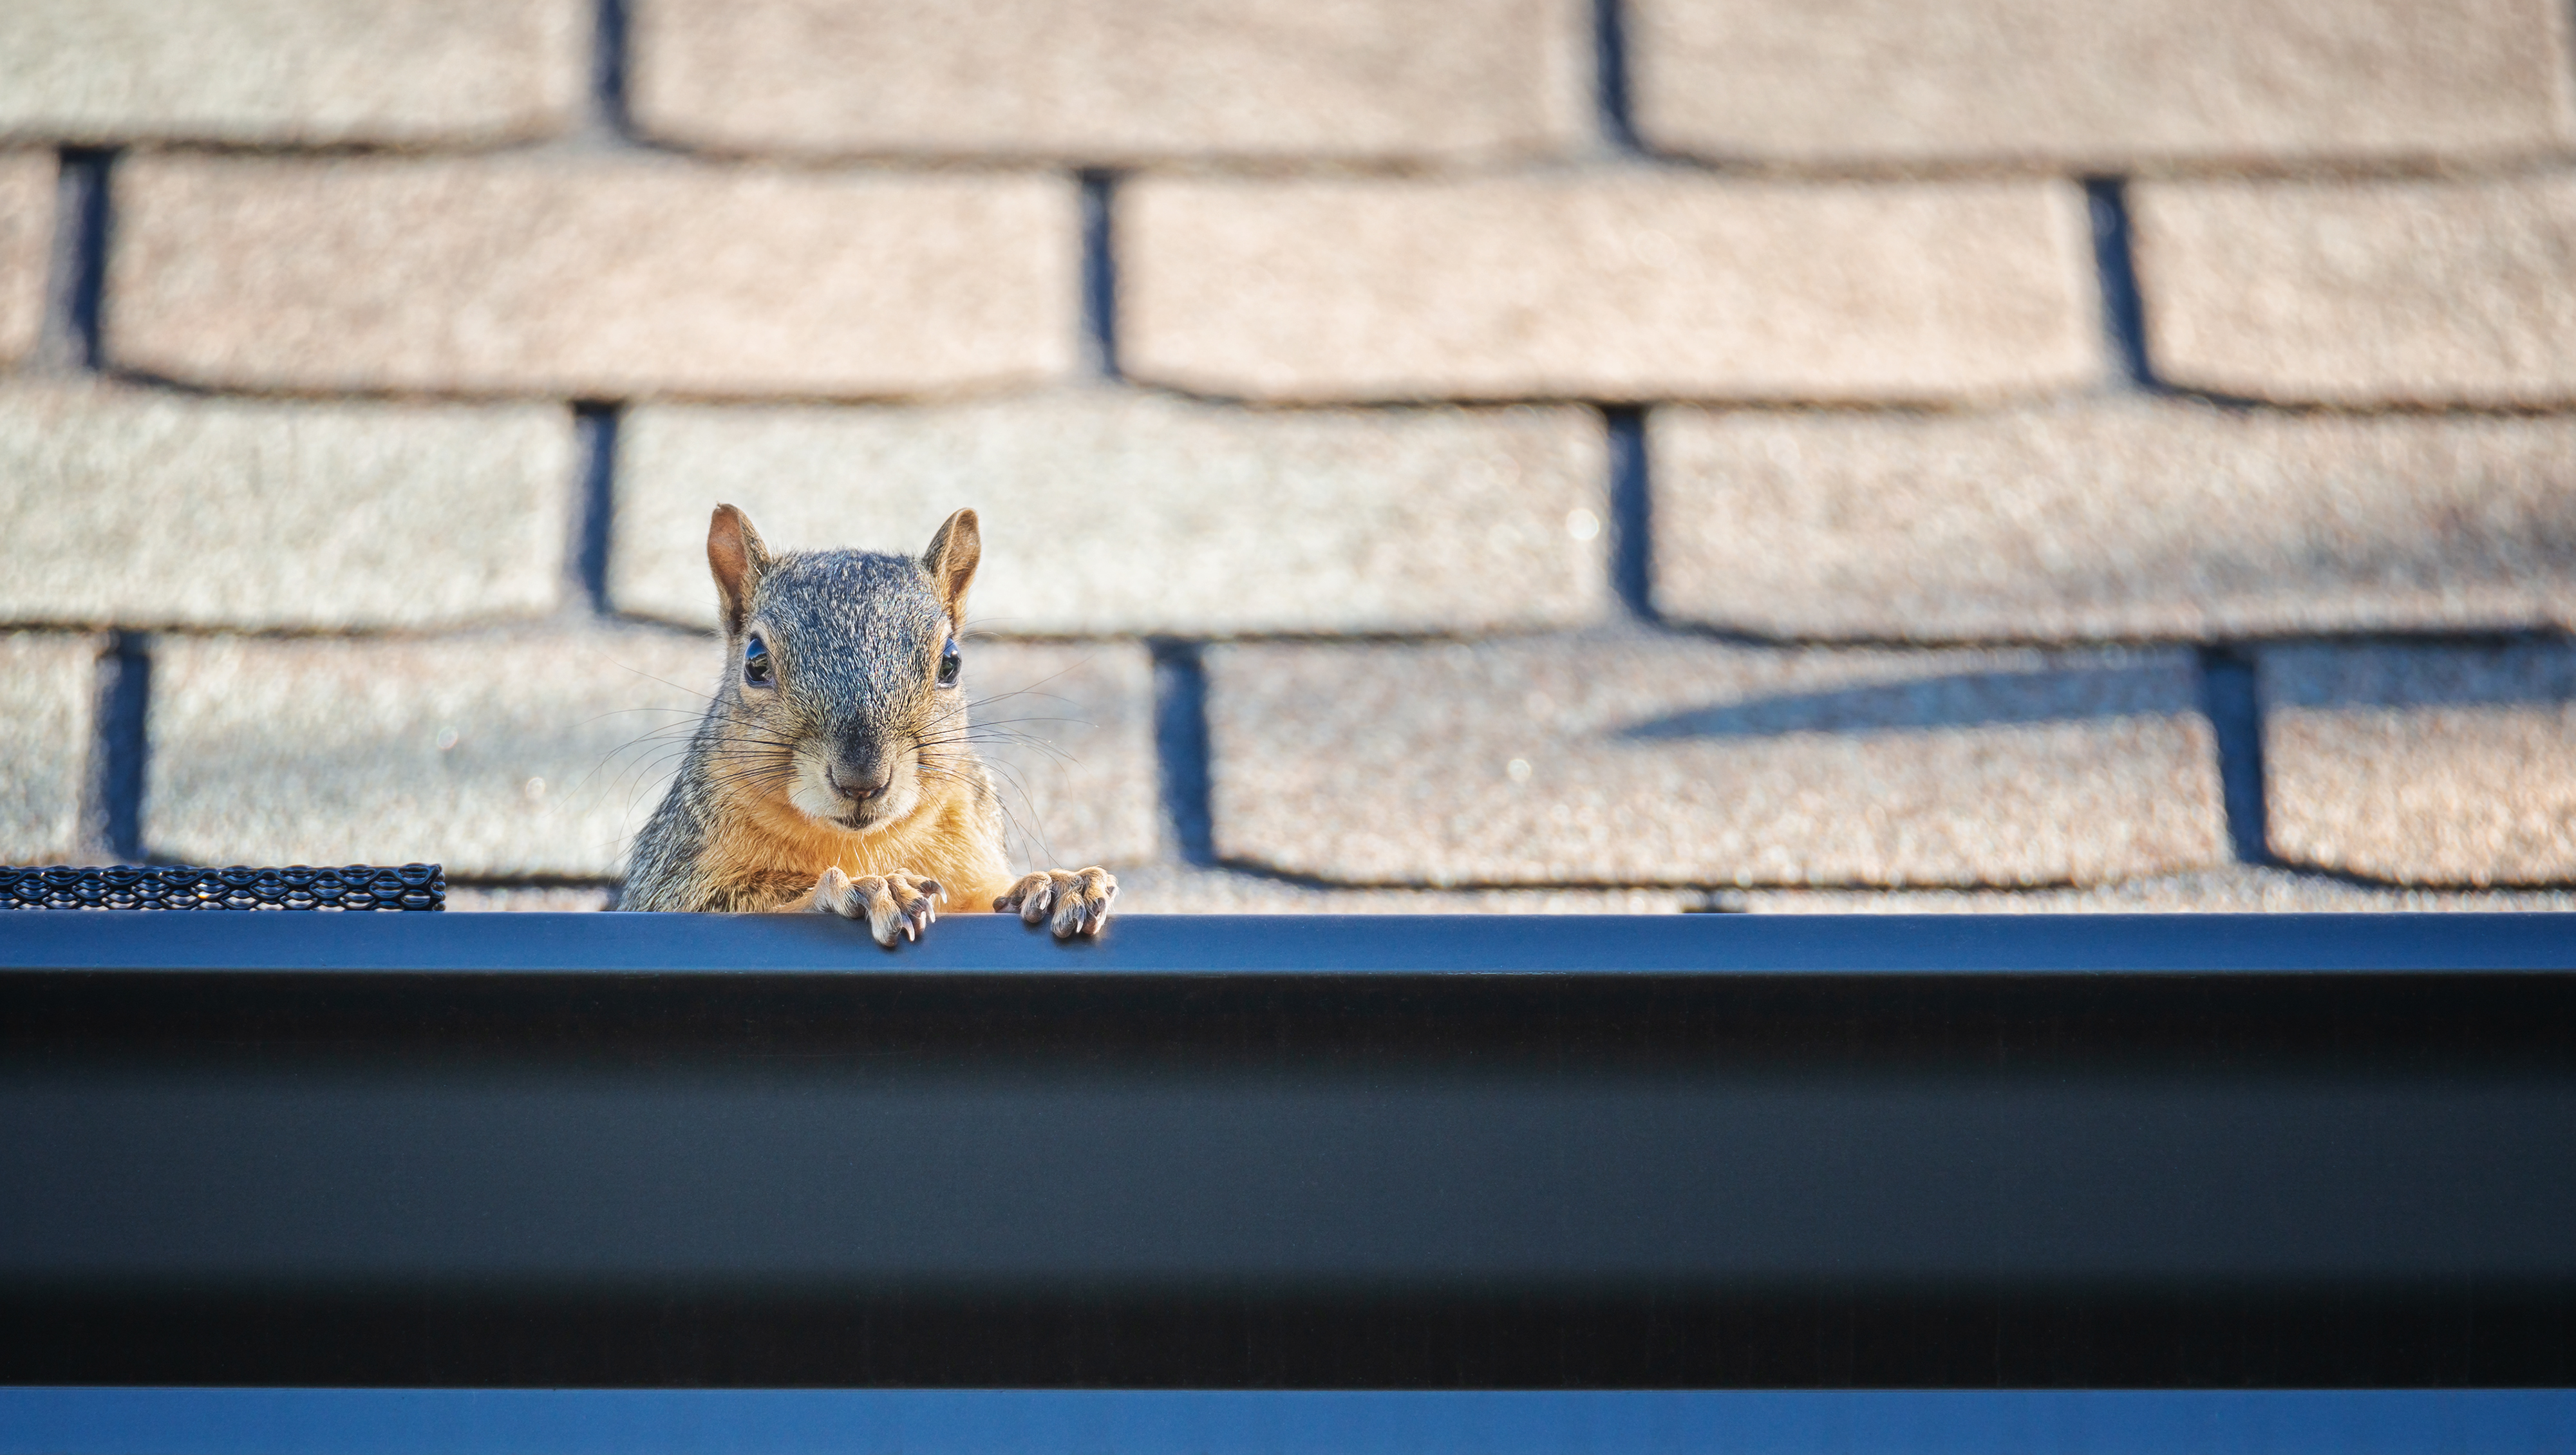 3 Steps You Can Take to Keep Squirrels Out of Your Attic - Houston Squirrel Removal - Elite Wildlife Services